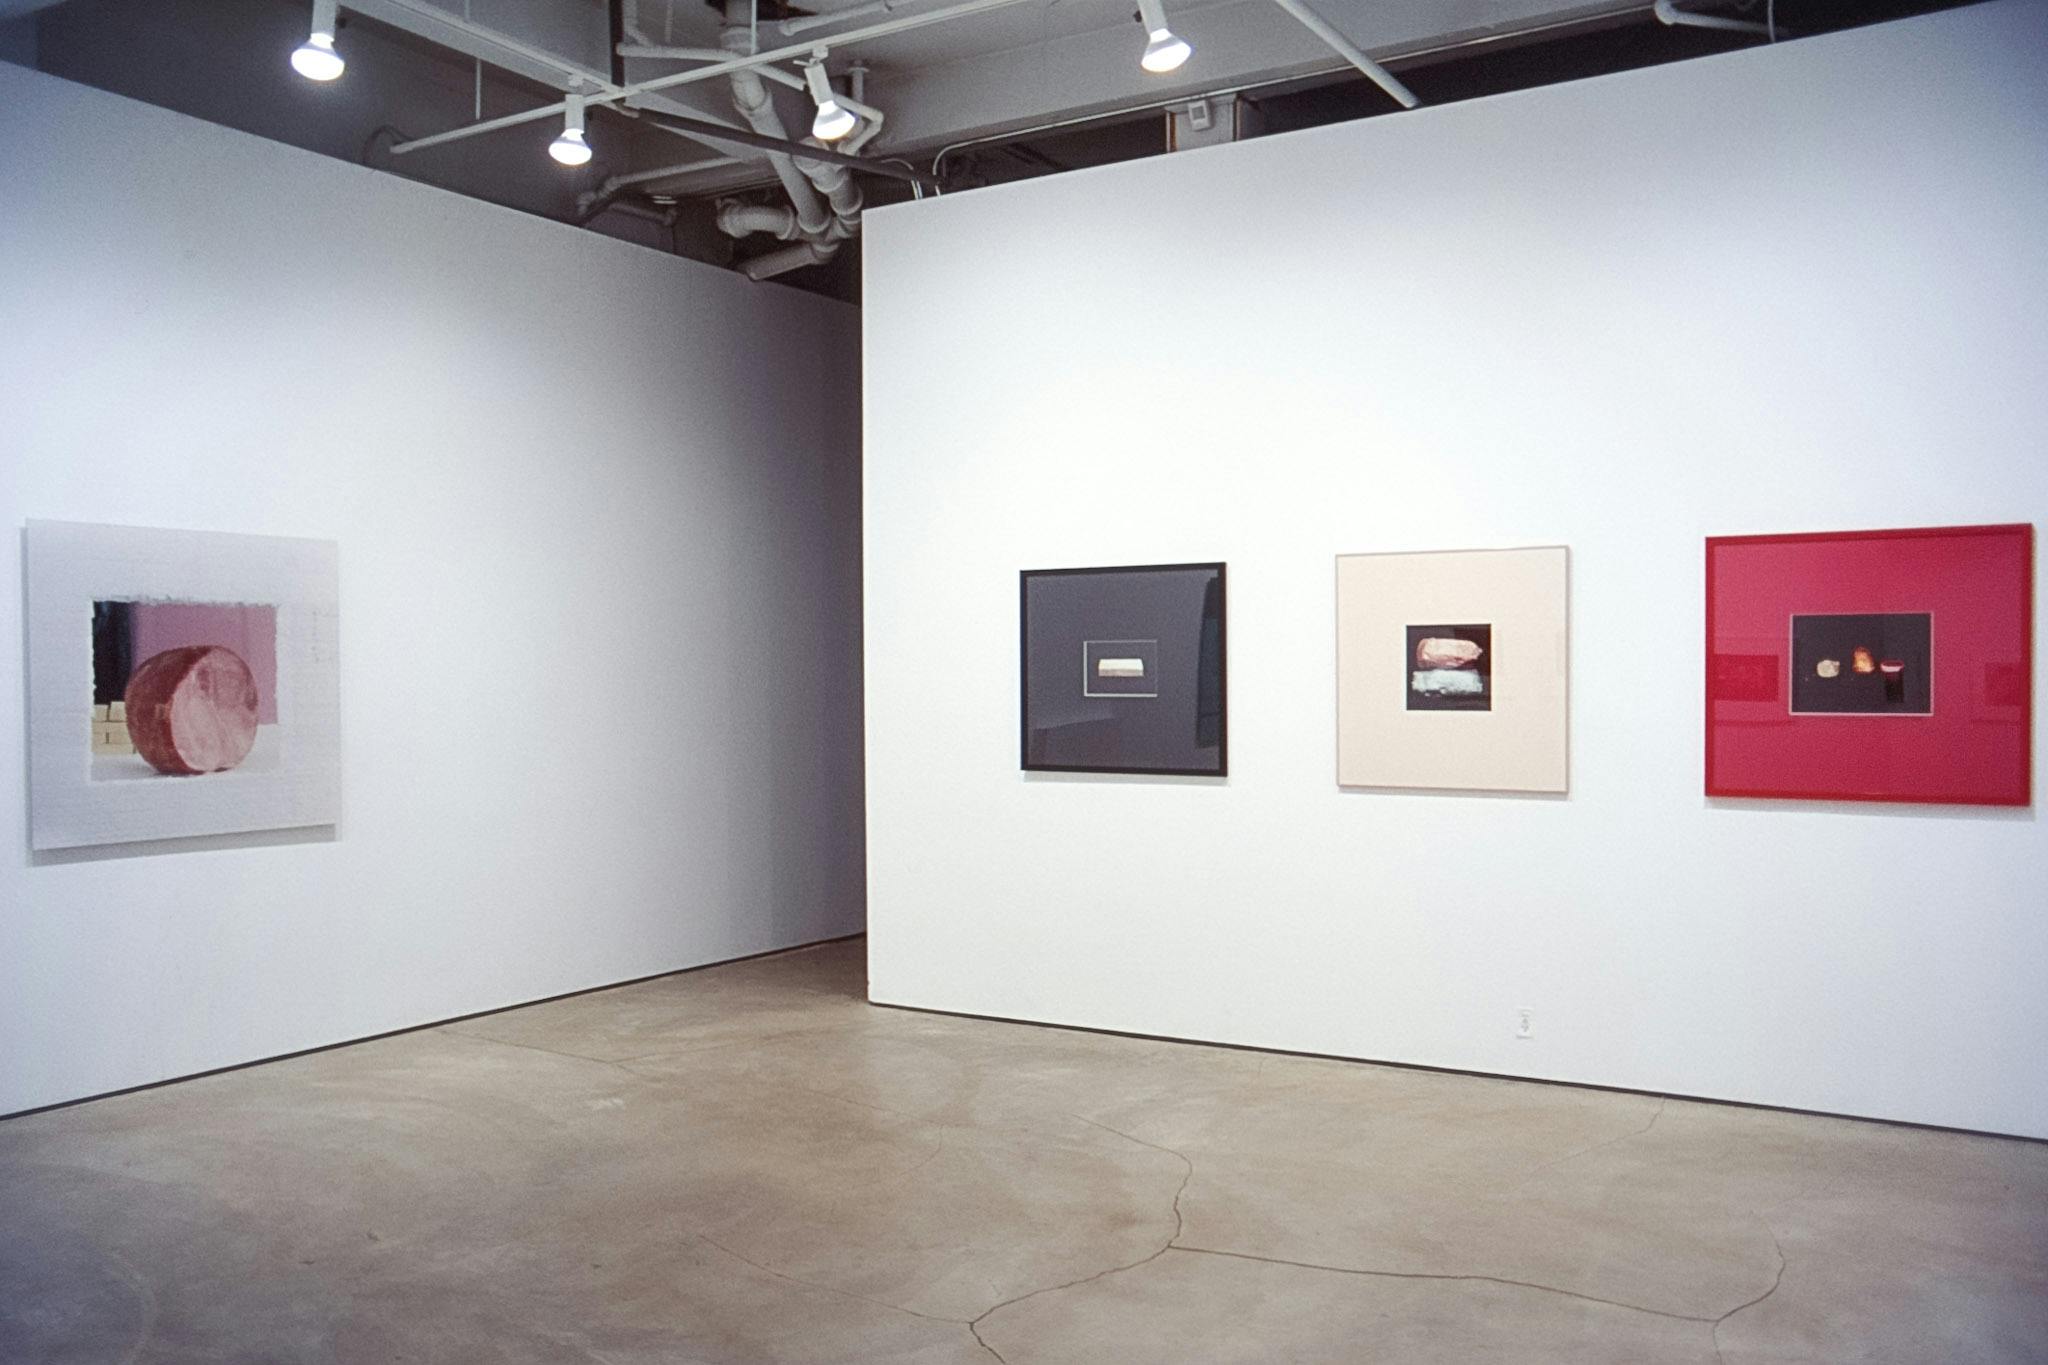 Four two-dimensional artworks are installed on the gallery walls. Coloured photographs of objects are mounted on the right-hand wall, and the white framed piece ​on the left is a photo of a ham.